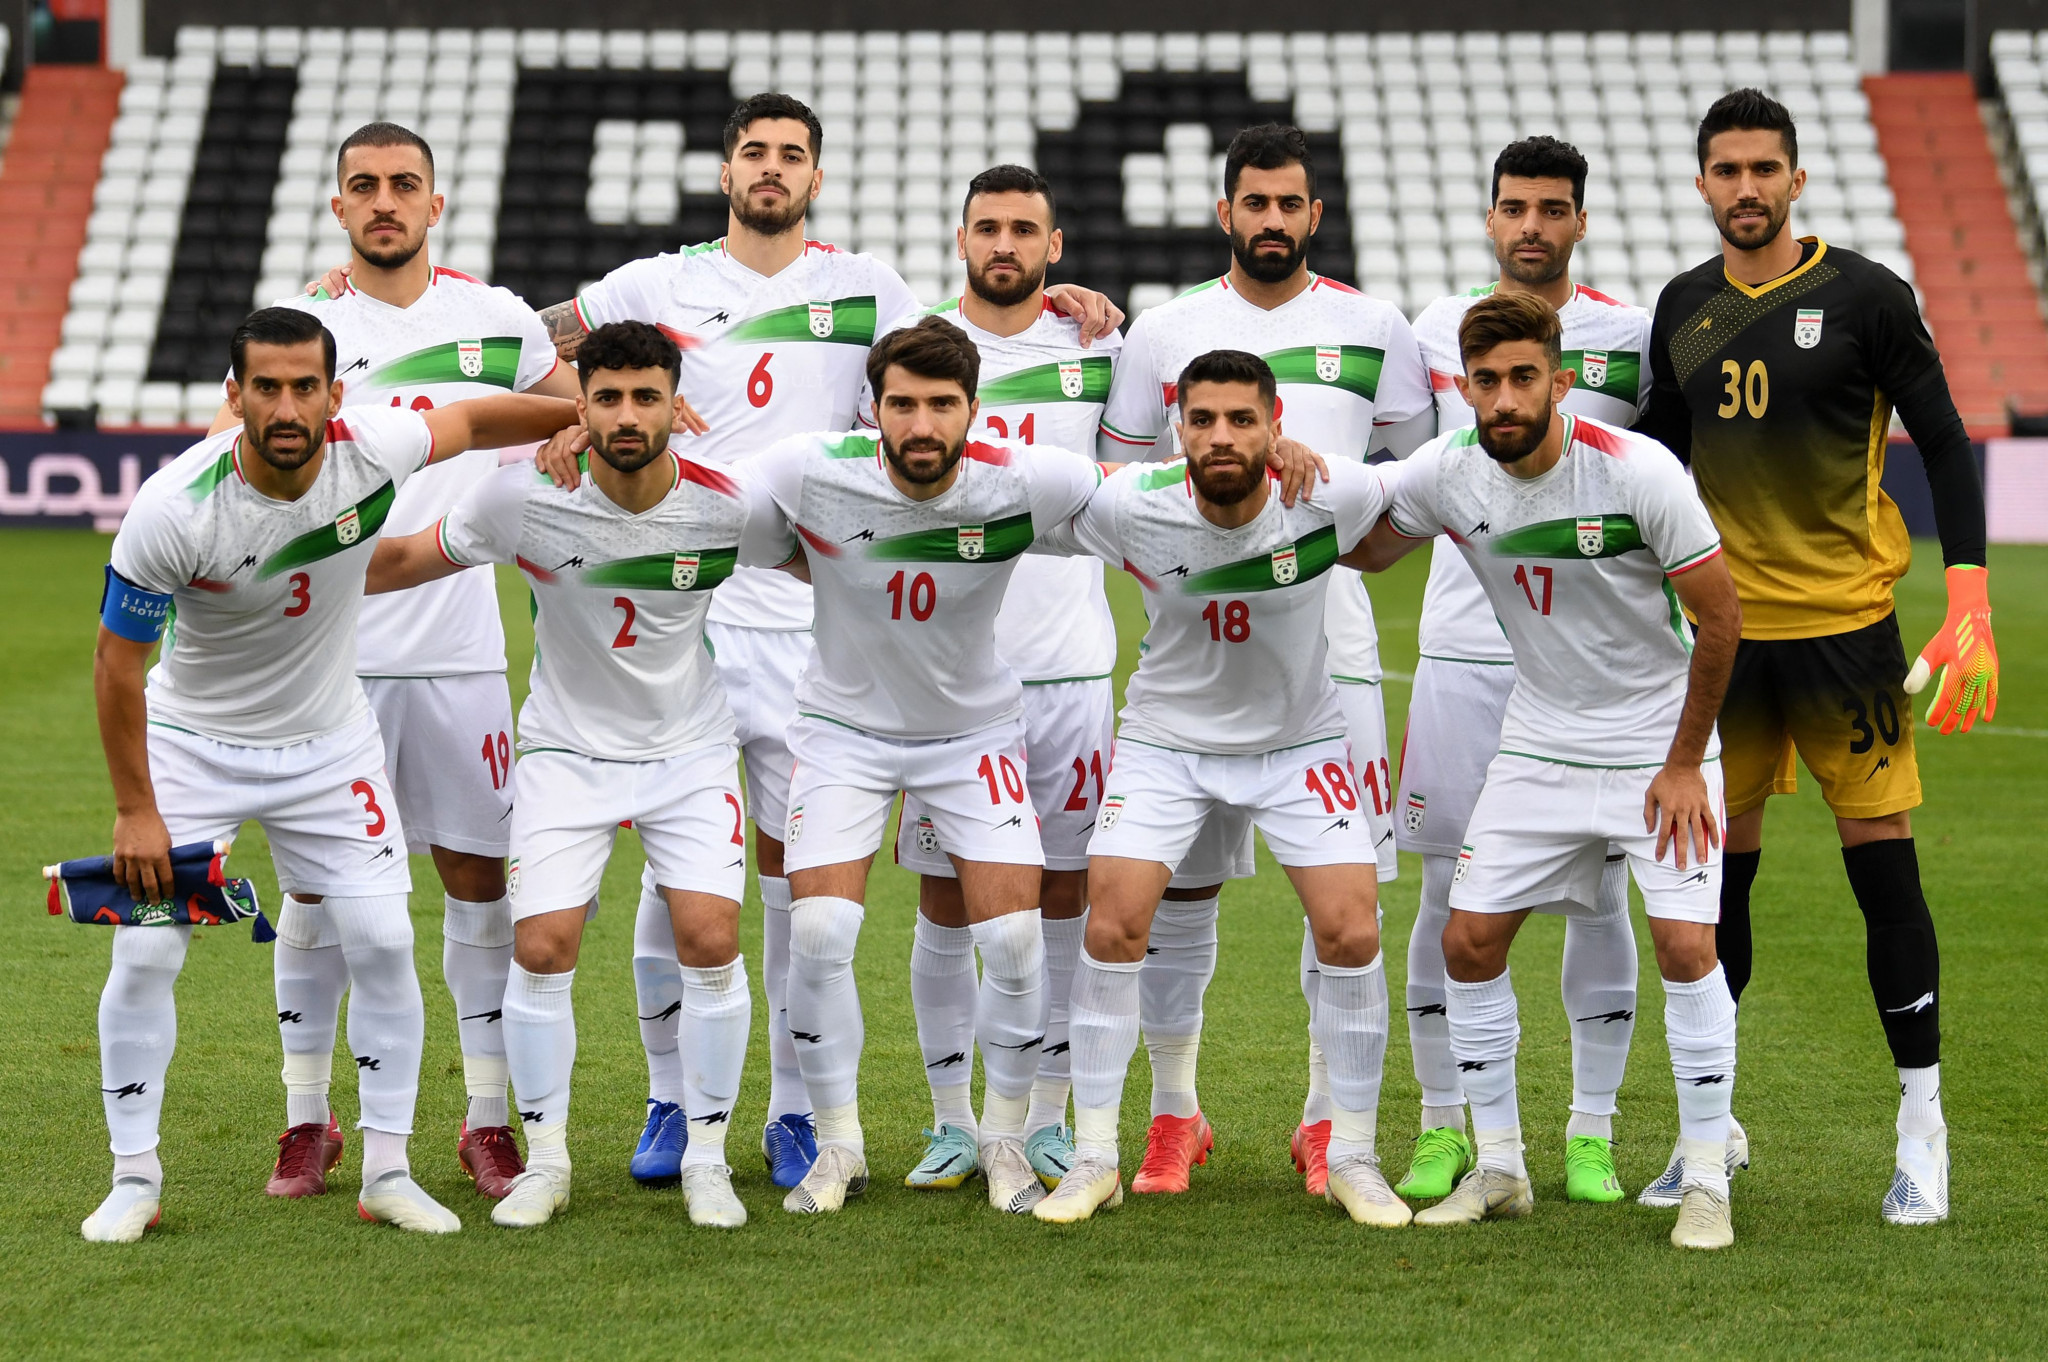 Shakhtar Donetsk chief executive Sergei Palkin has called on FIFA to remove Iran from the World Cup, due to the country's involvement in Russia's war on Ukraine ©Getty Images